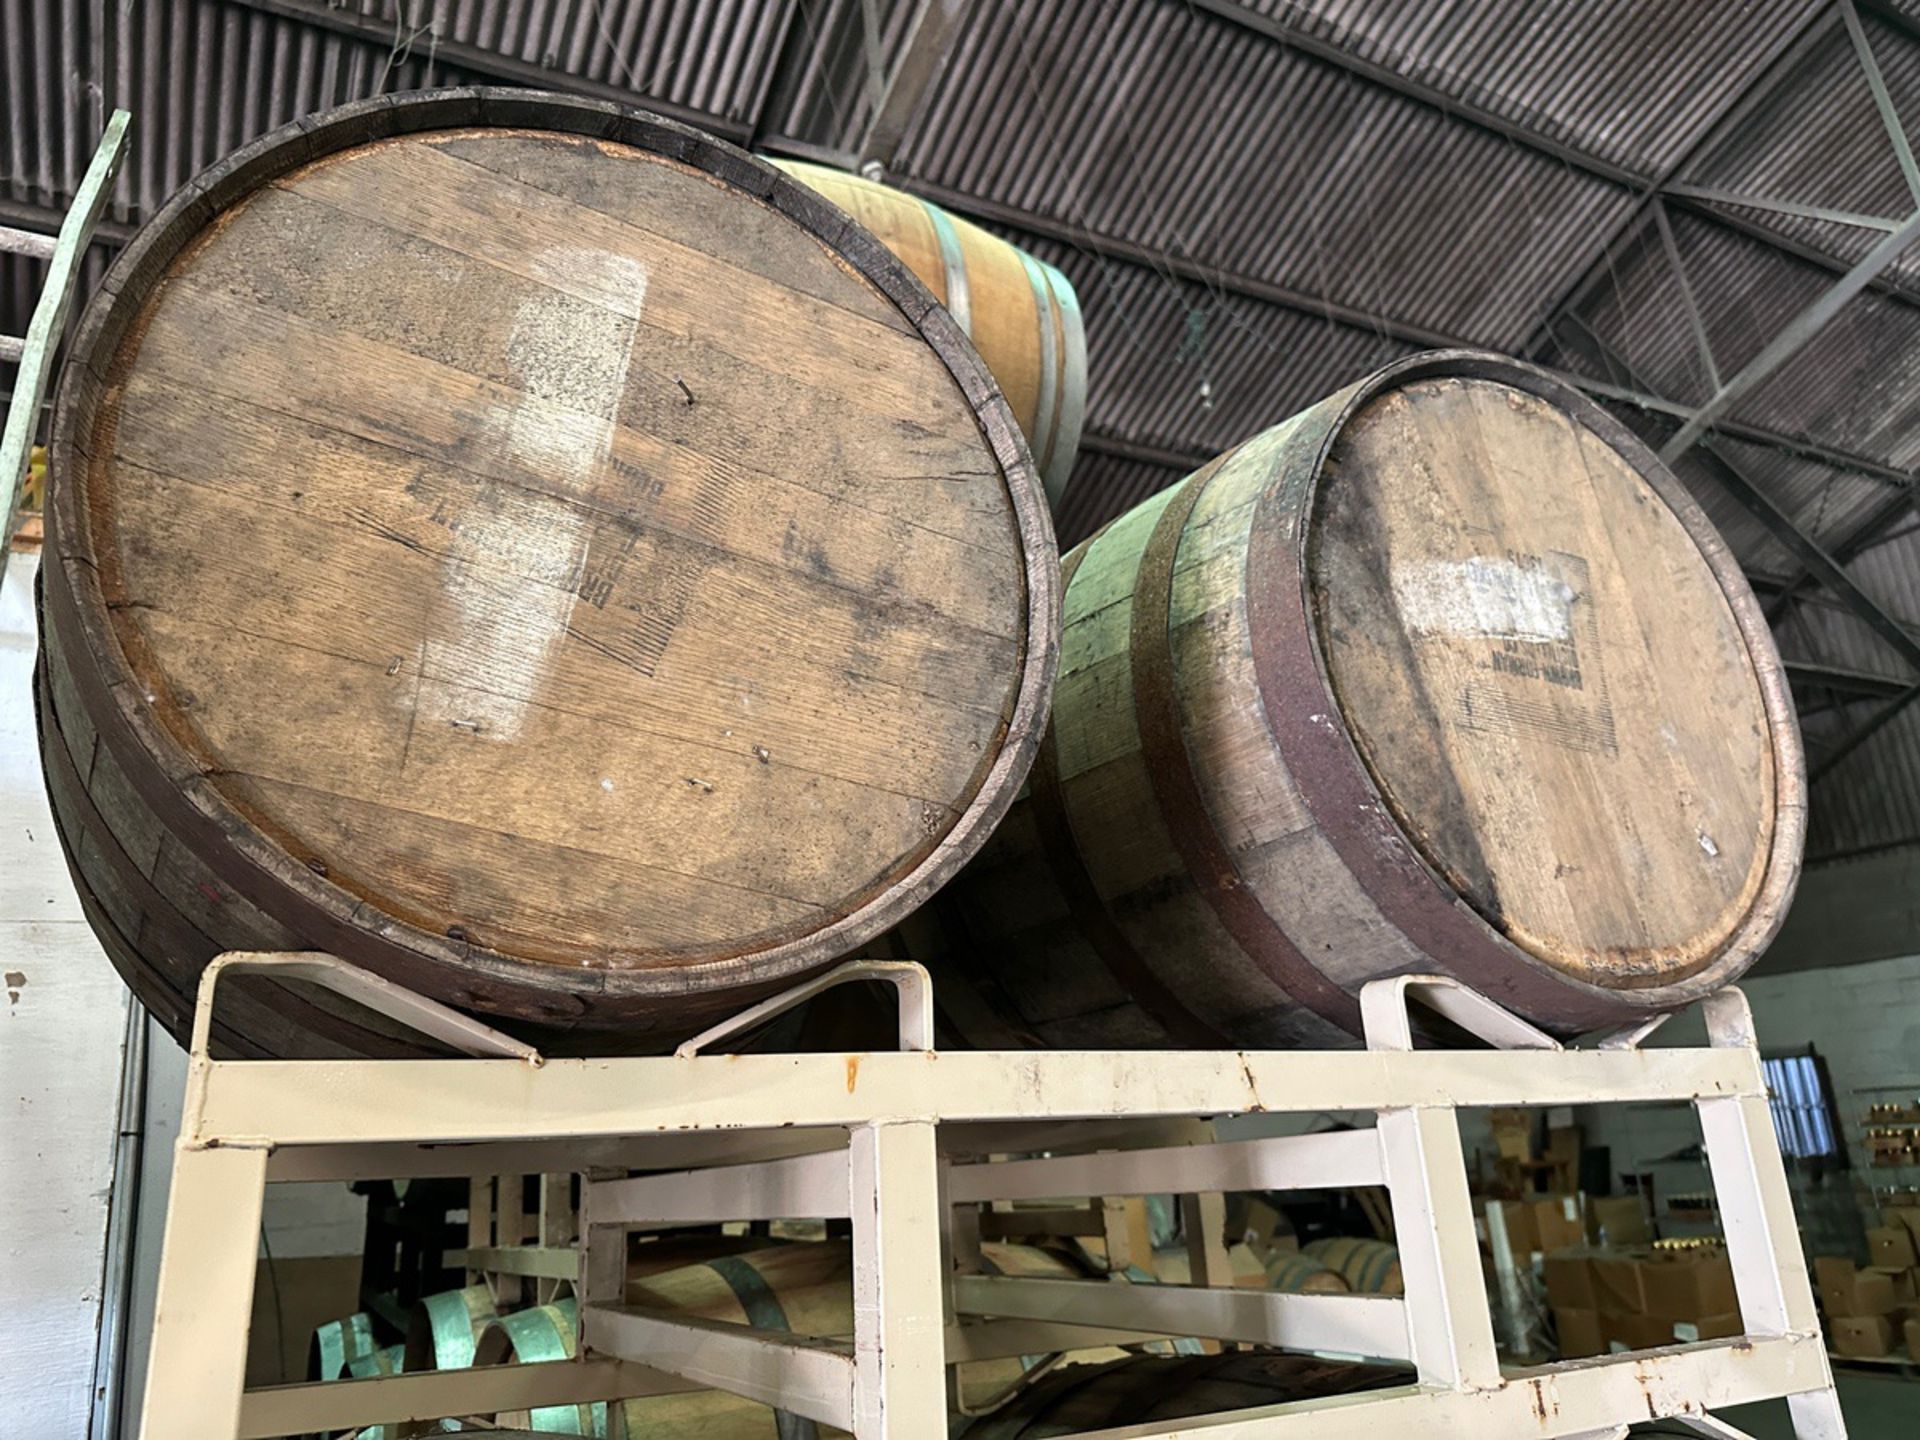 Lot of (4) Wooden Barrels (Used for Sours) | Rig Fee $50 - Image 2 of 2